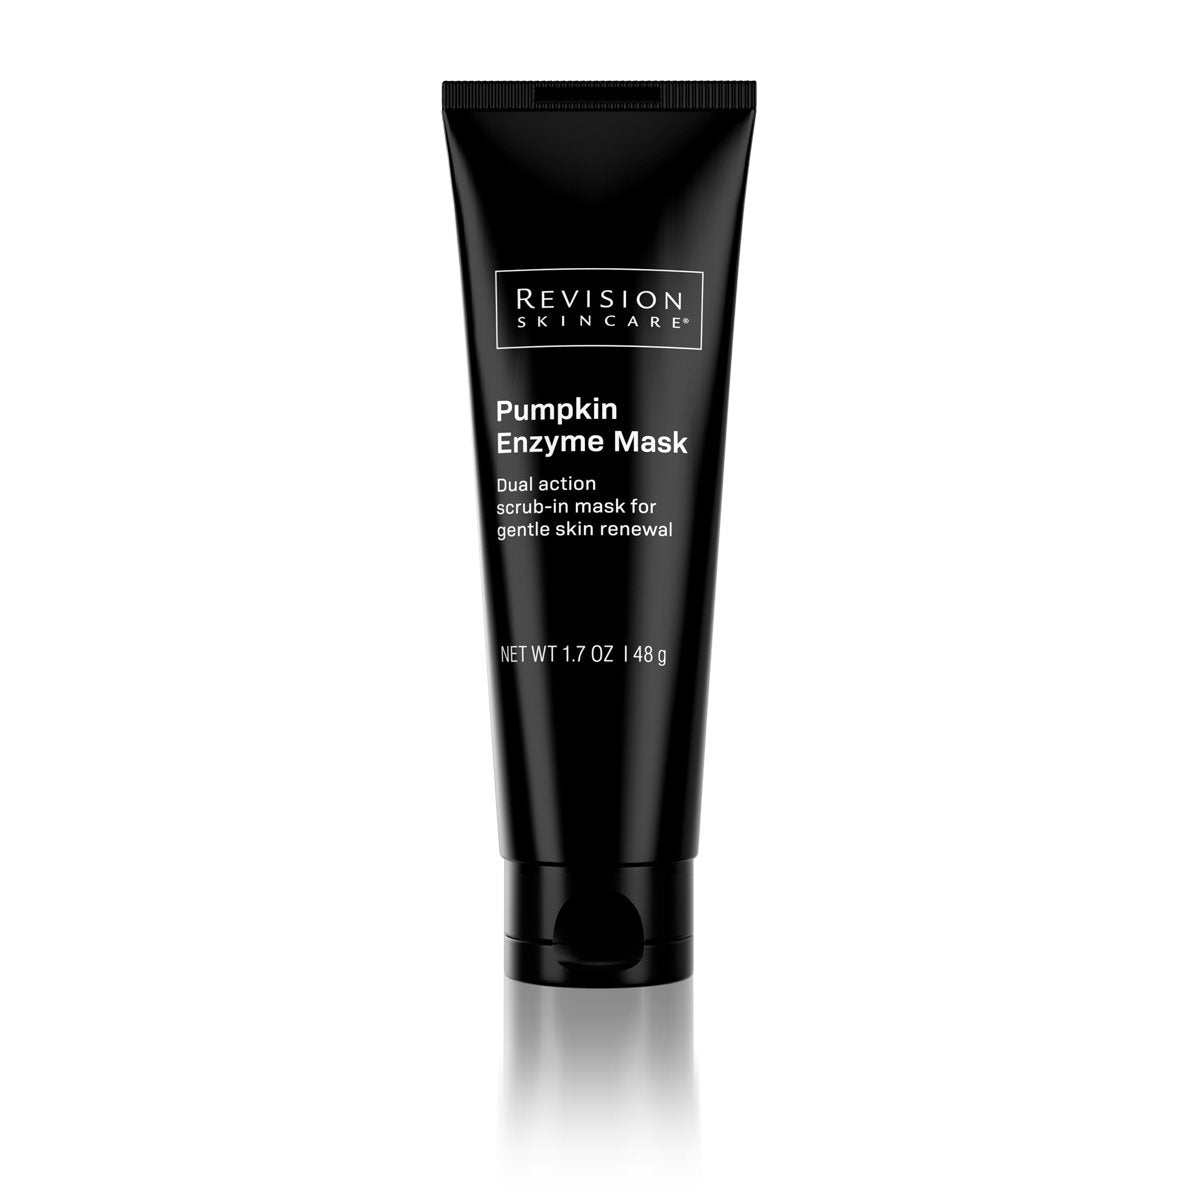 Revision Skincare Pumpkin Enzyme Mask - Totality Medispa and Skincare